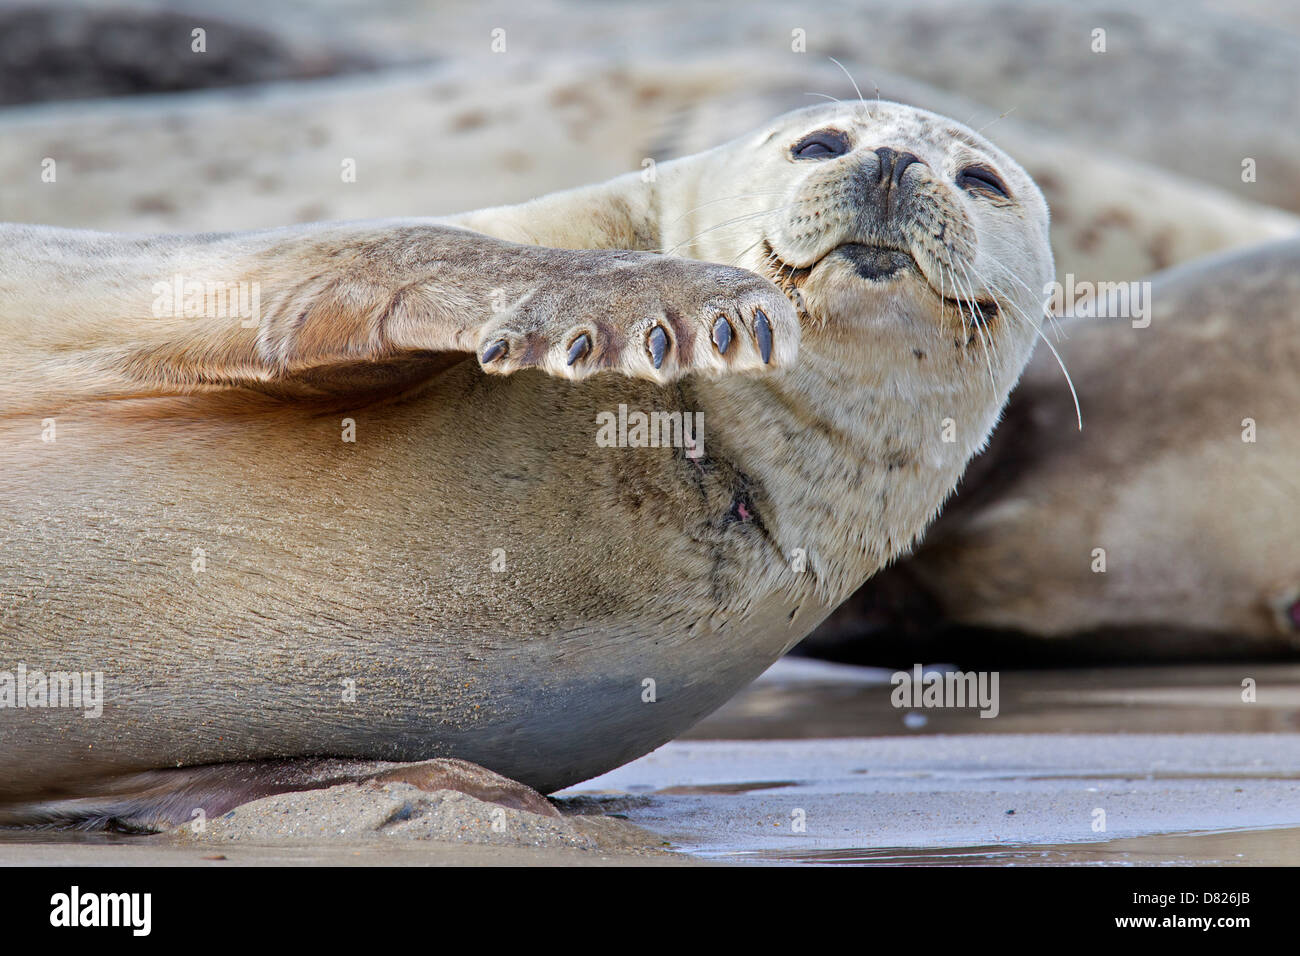 Close-up of Common seal / Harbour seal (Phoca vitulina) on beach showing claws on front flipper Stock Photo